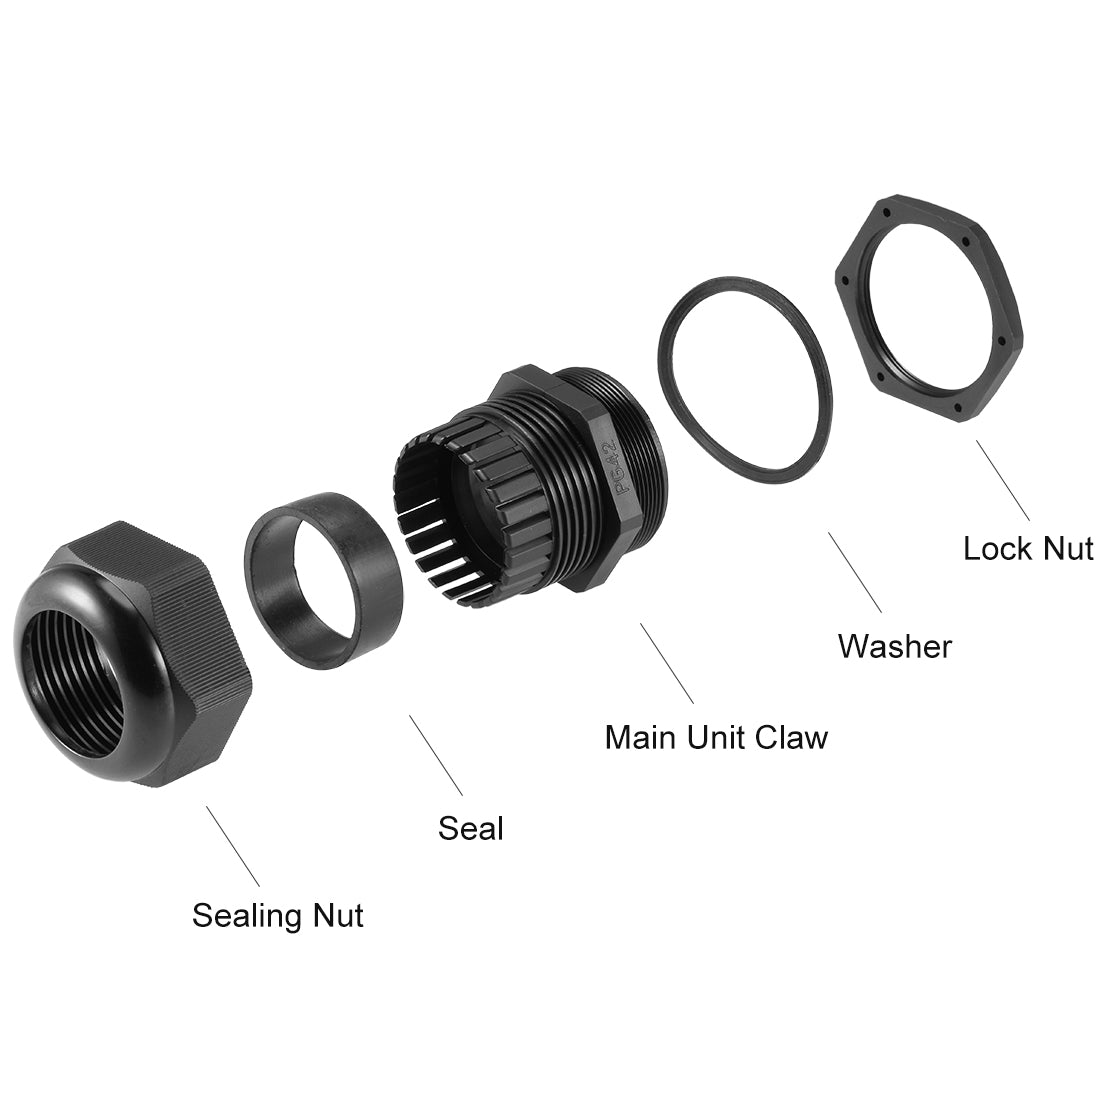 uxcell Uxcell PG42 Cable Gland 32mm-38mm Wire Hole Waterproof Nylon Joint Adjustable Locknut with Washer Black 6pcs